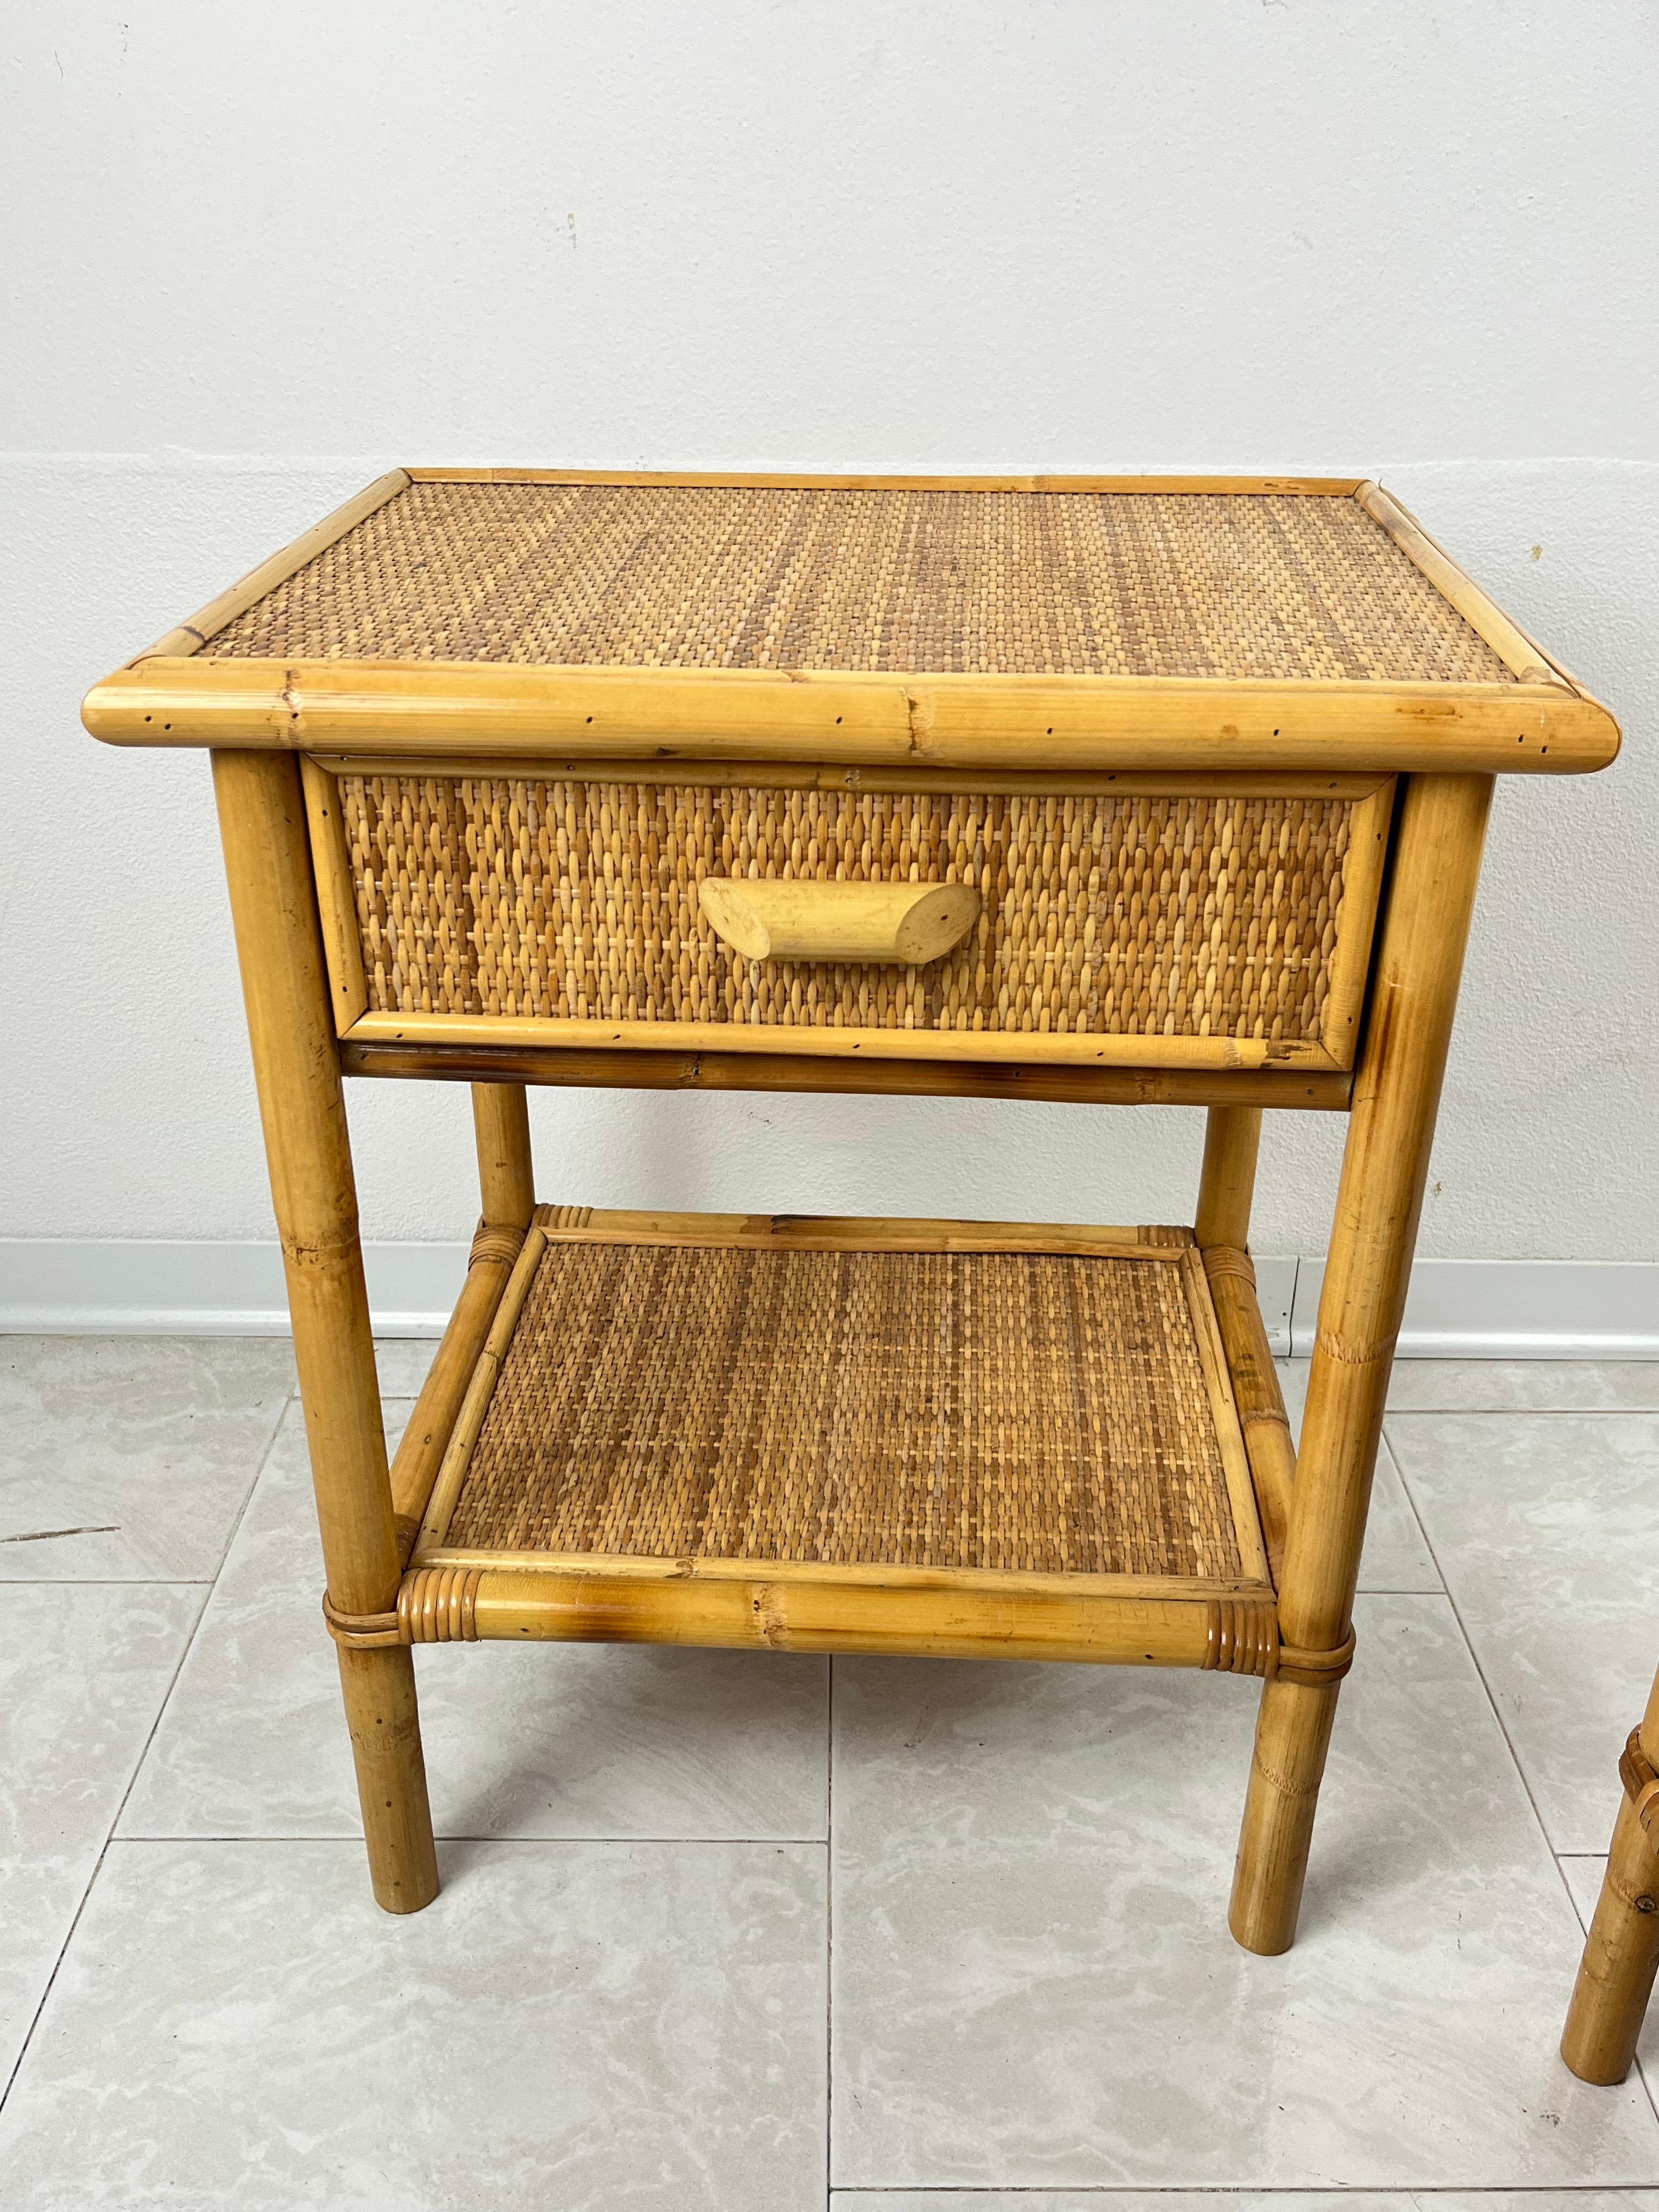 Set of 2 Mid-Century French Riviera Wicker And Rattan Bedside Tables 1960s For Sale 1